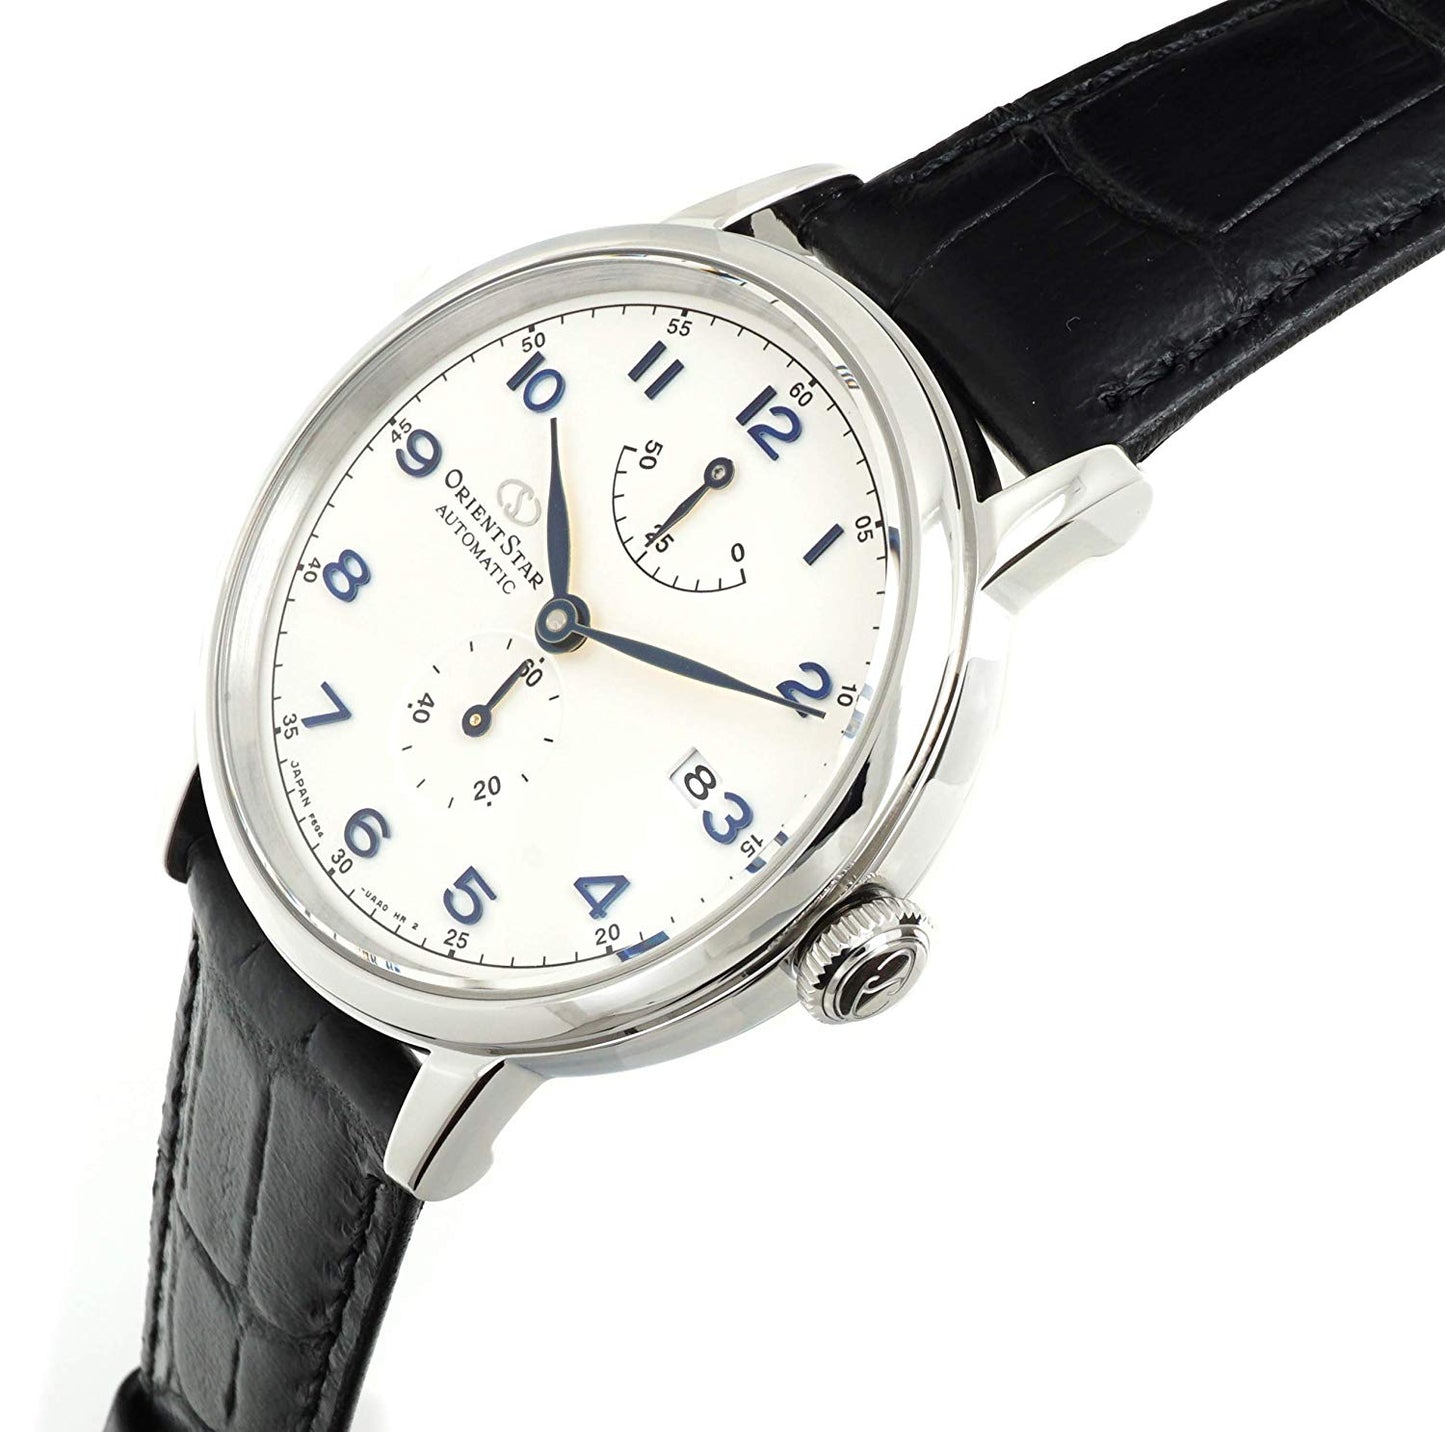 ORIENT STAR Heritage Gothic RE-AW0004S00B